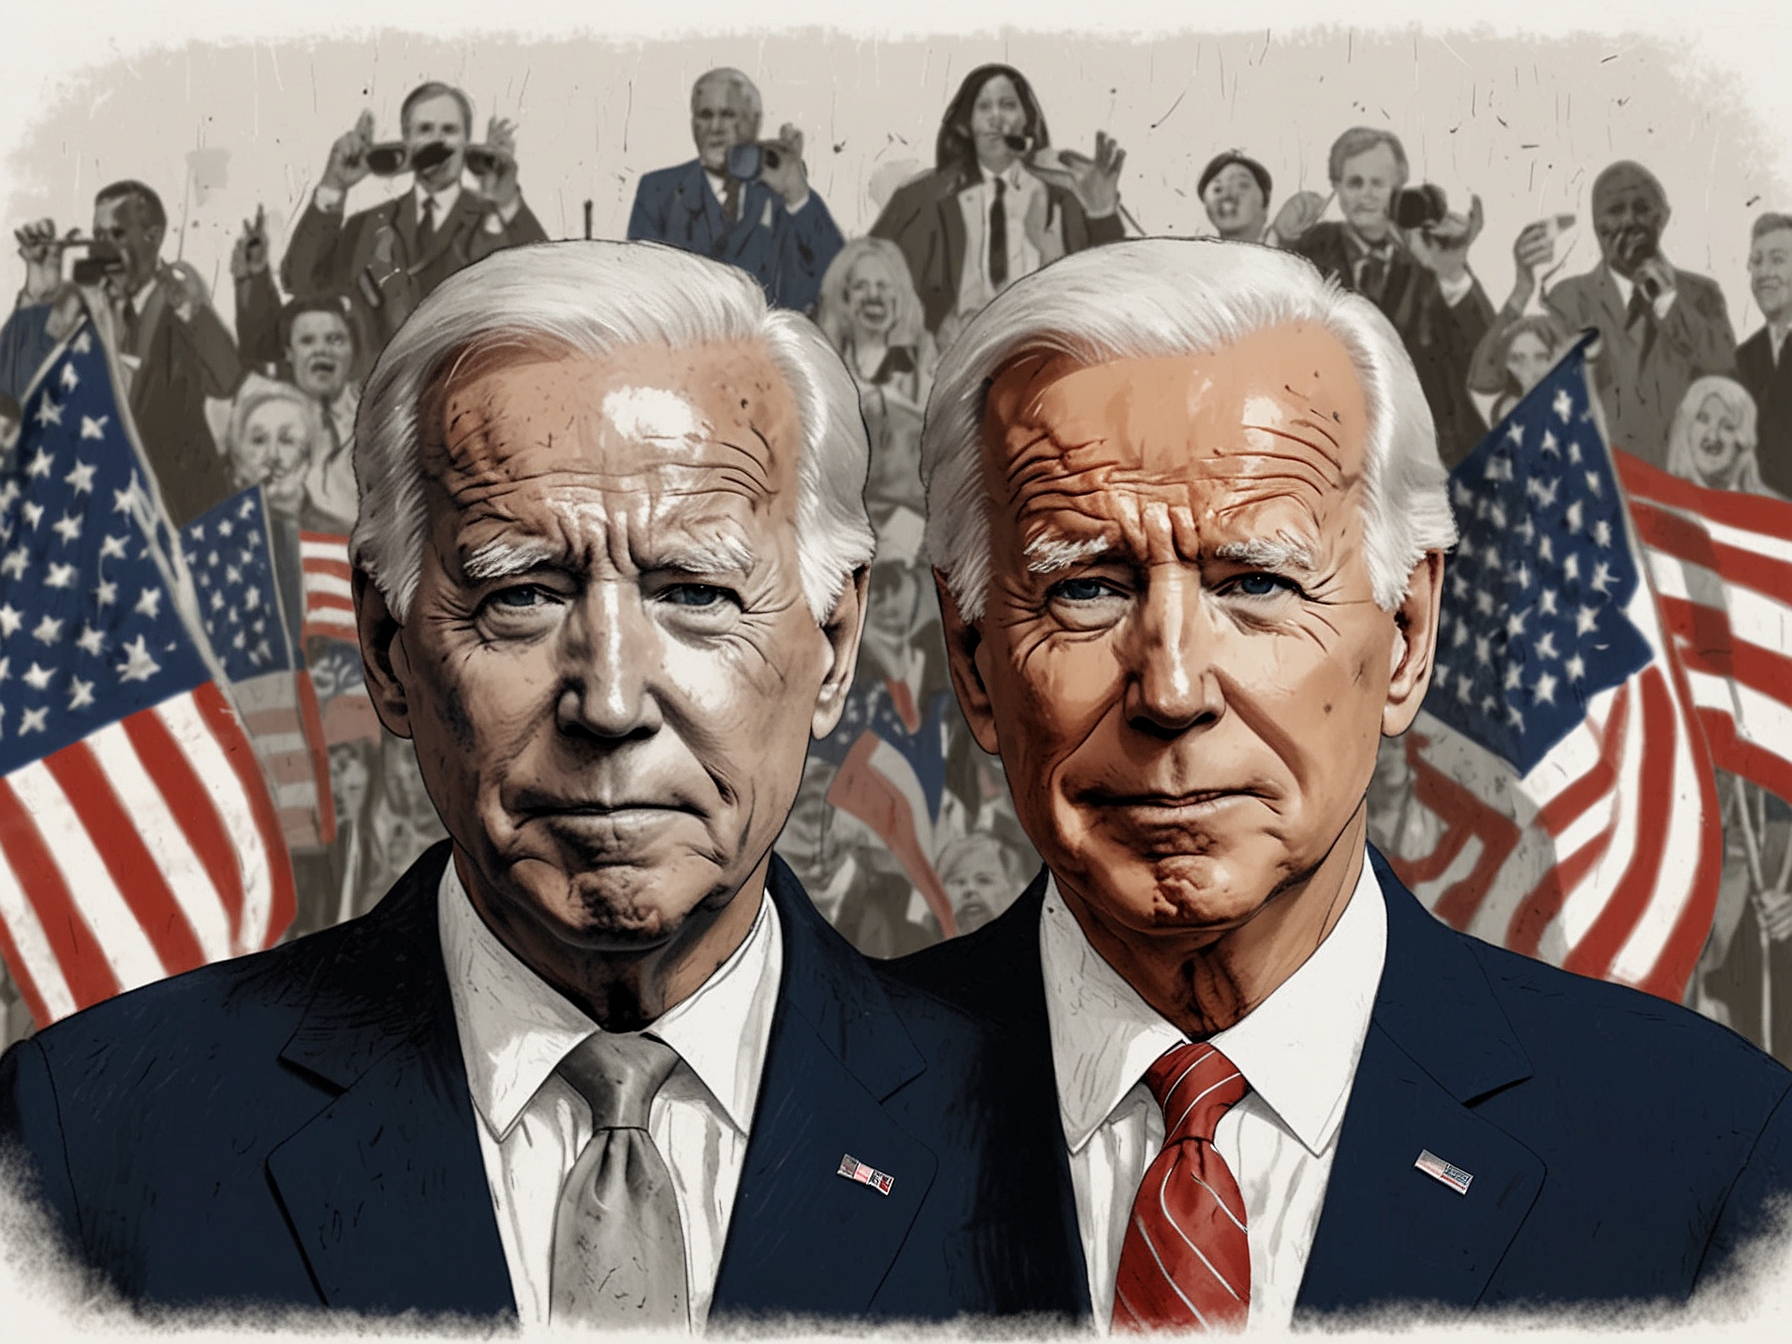 An illustration showing a split screen with supporters of Biden on one side and Trump supporters on the other, symbolizing the deep political divide and polarization in the country.